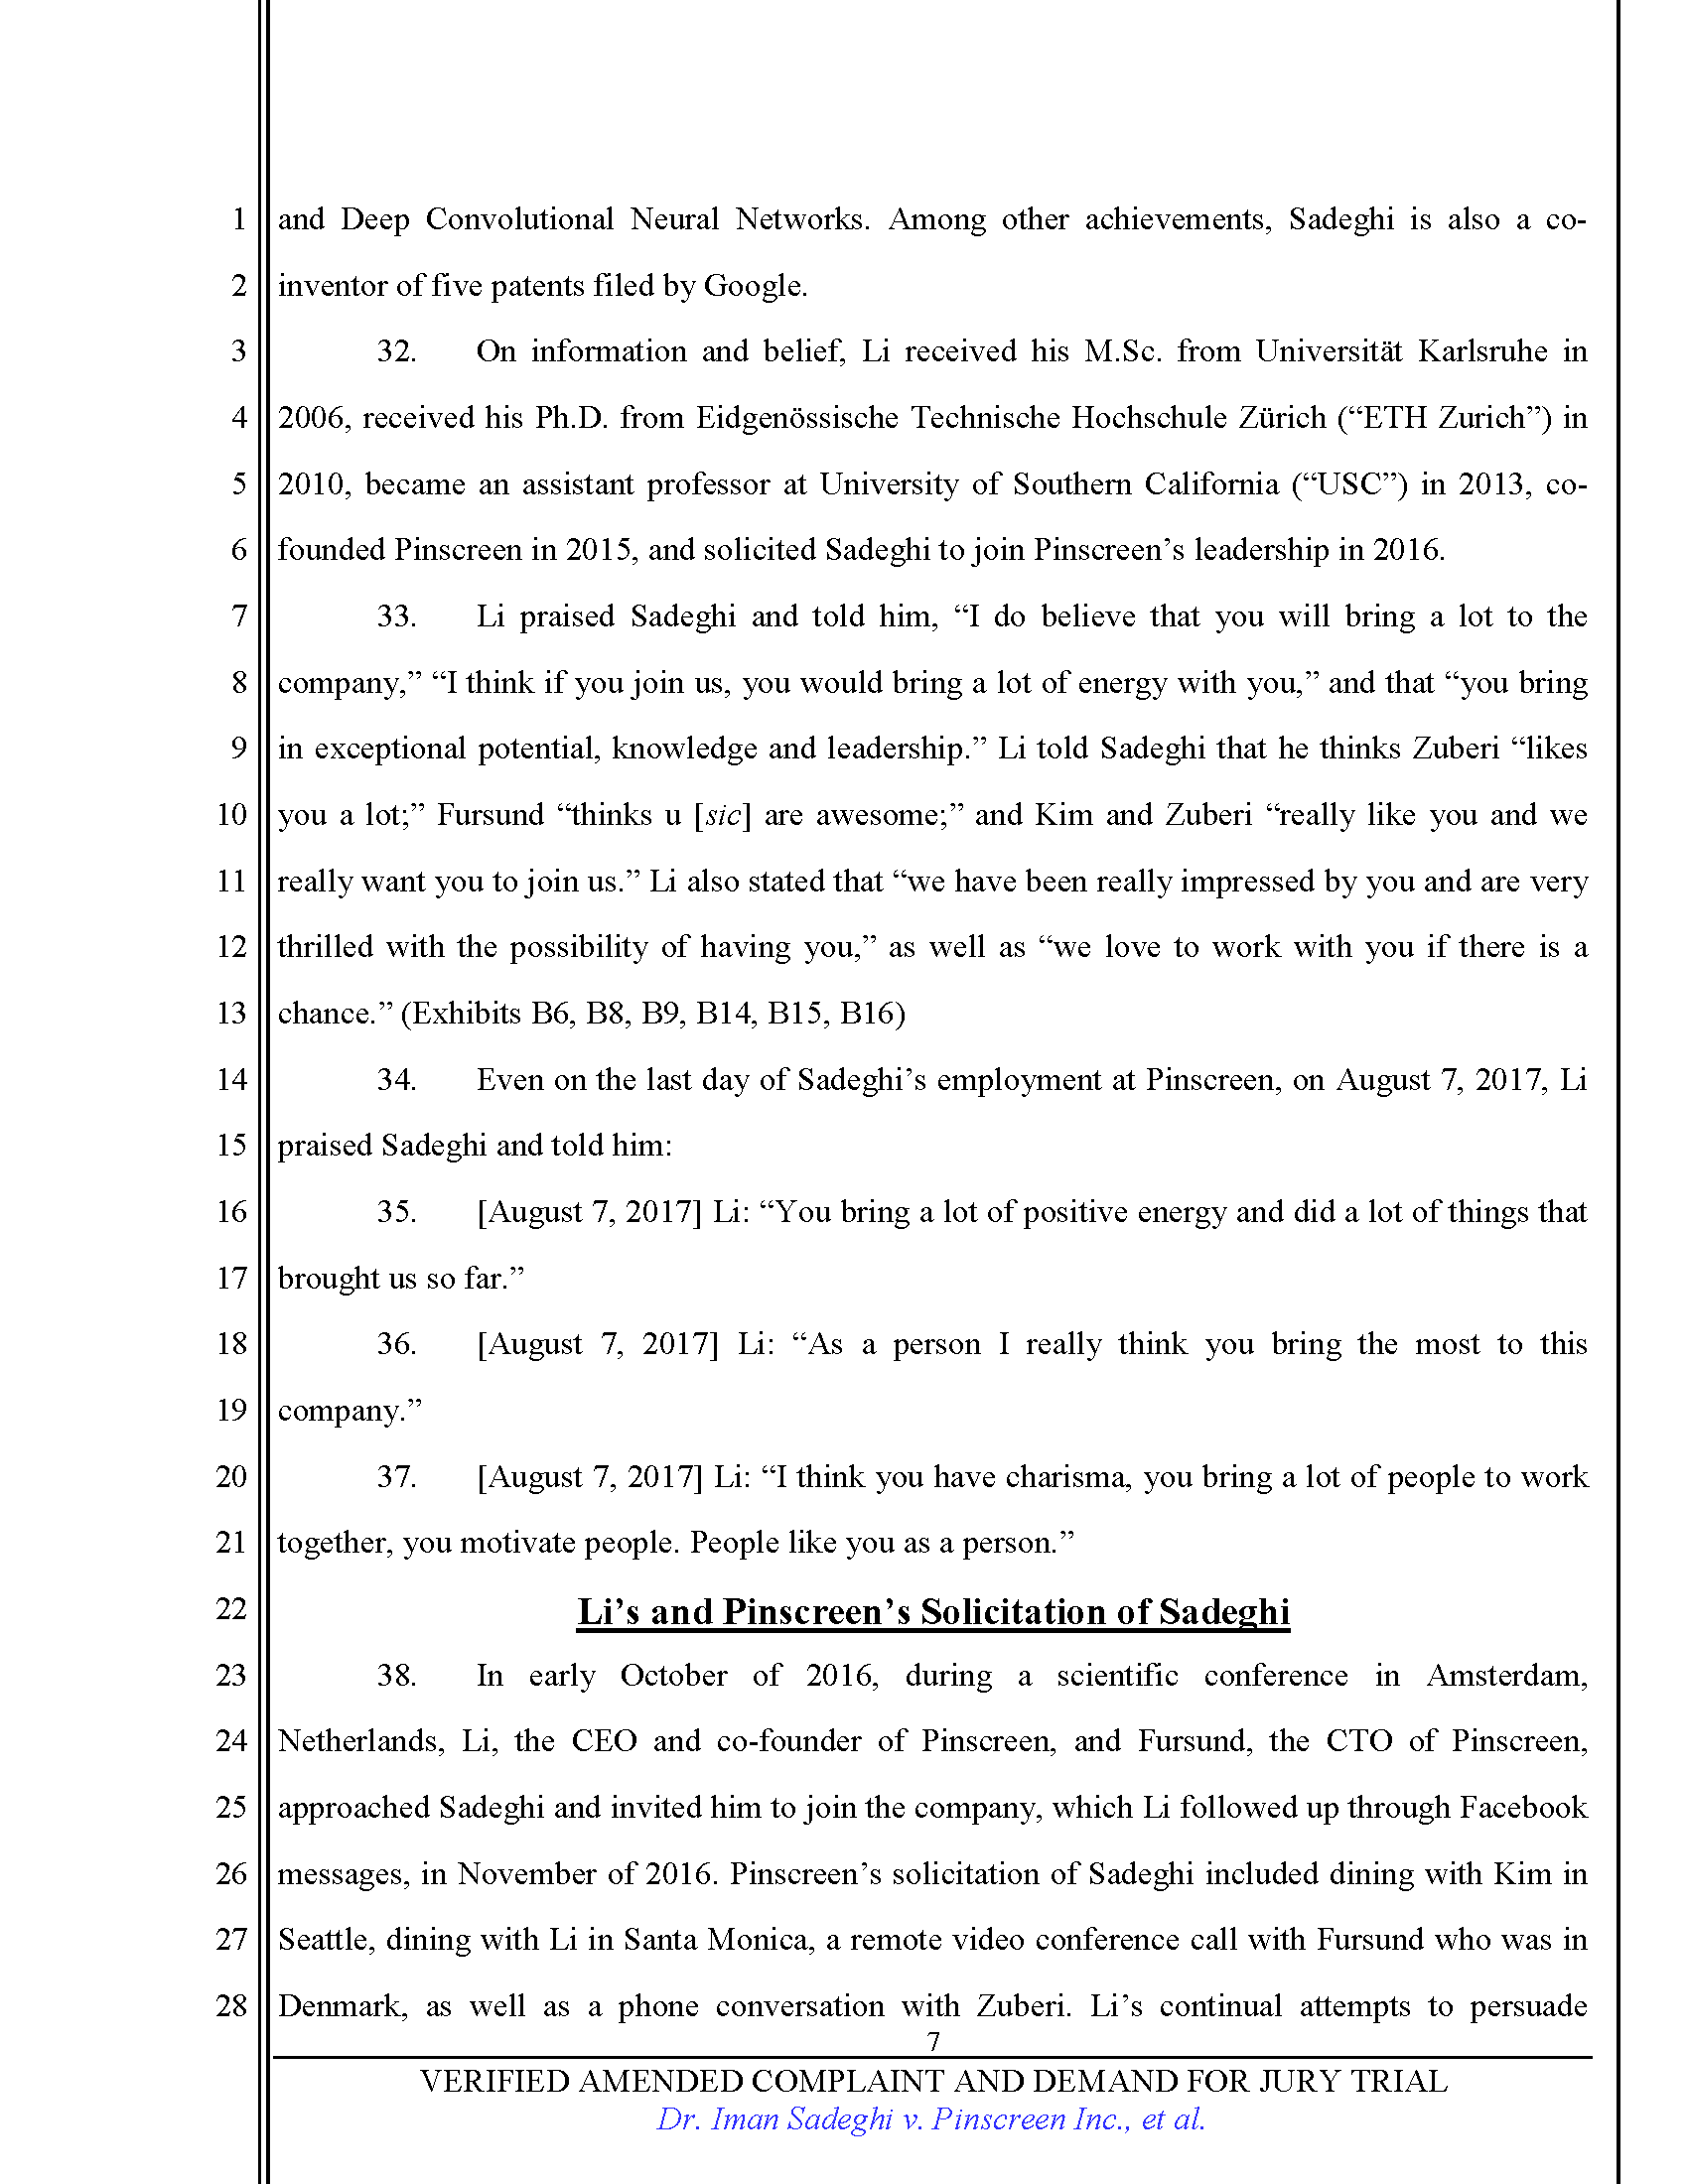 First Amended Complaint (FAC) Page 7